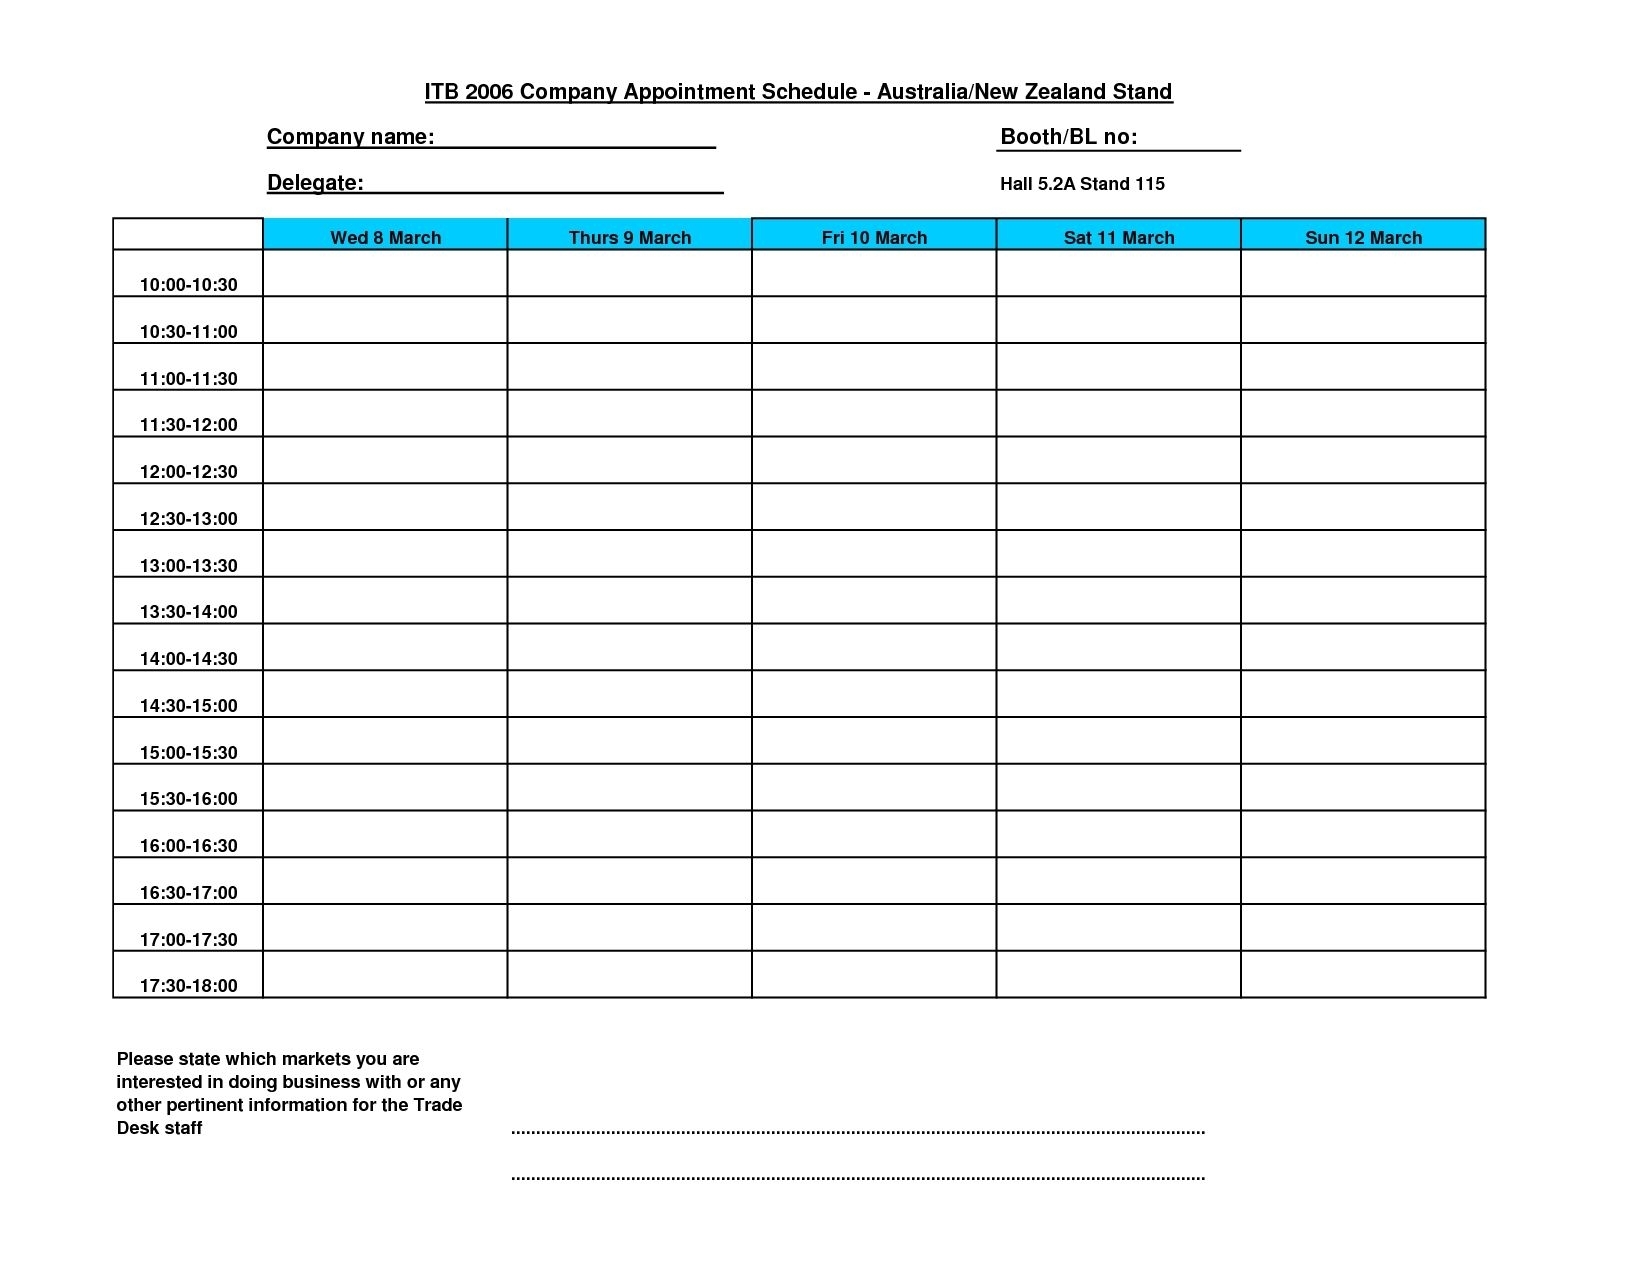 Catch 15 Min Schedule Appointment Template